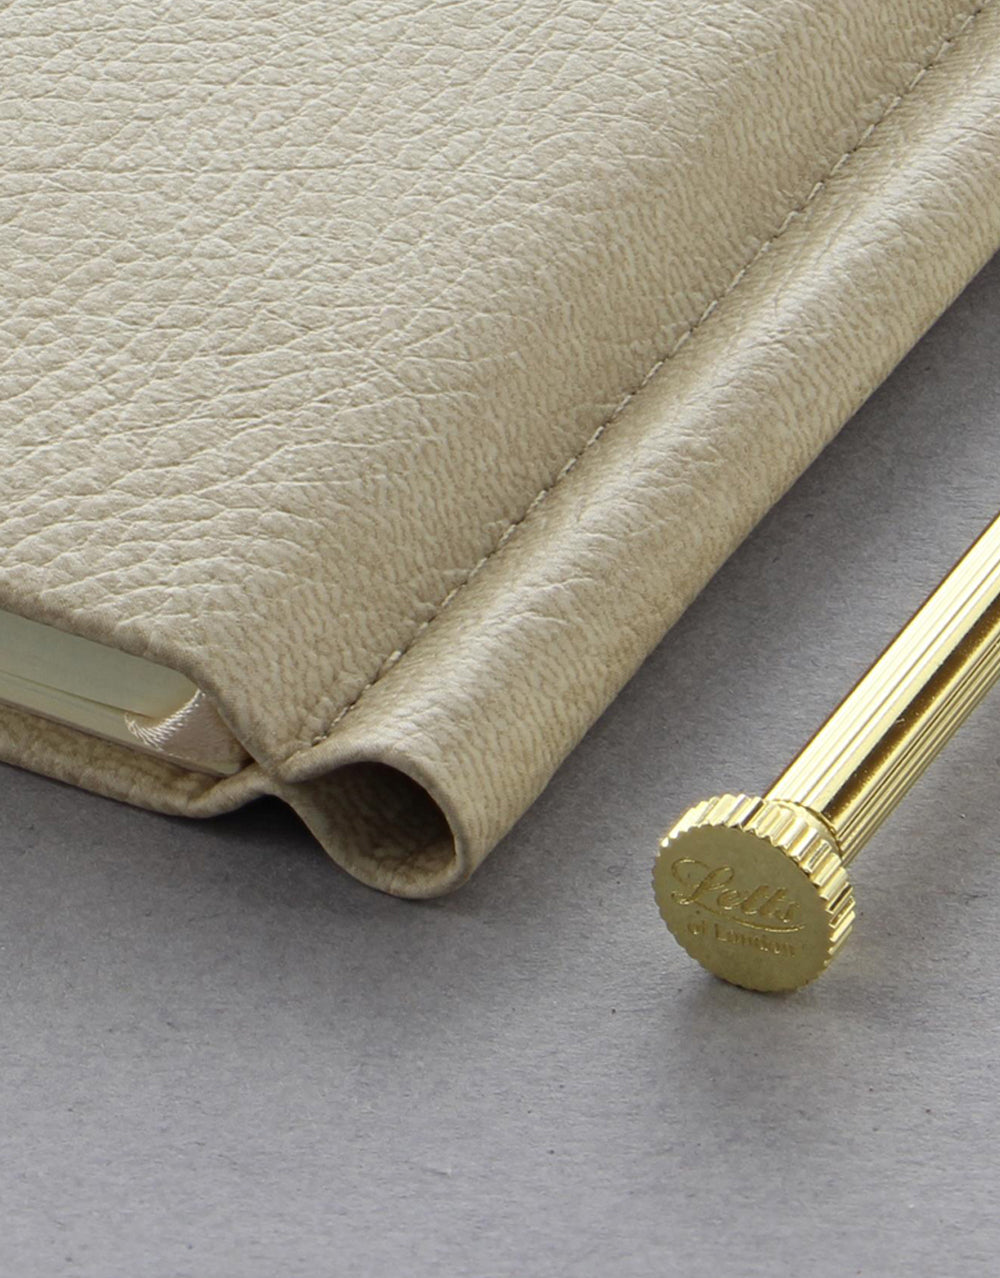 Origins Slim Pocket Ruled Notebook Stone with. Pen#colour_stone